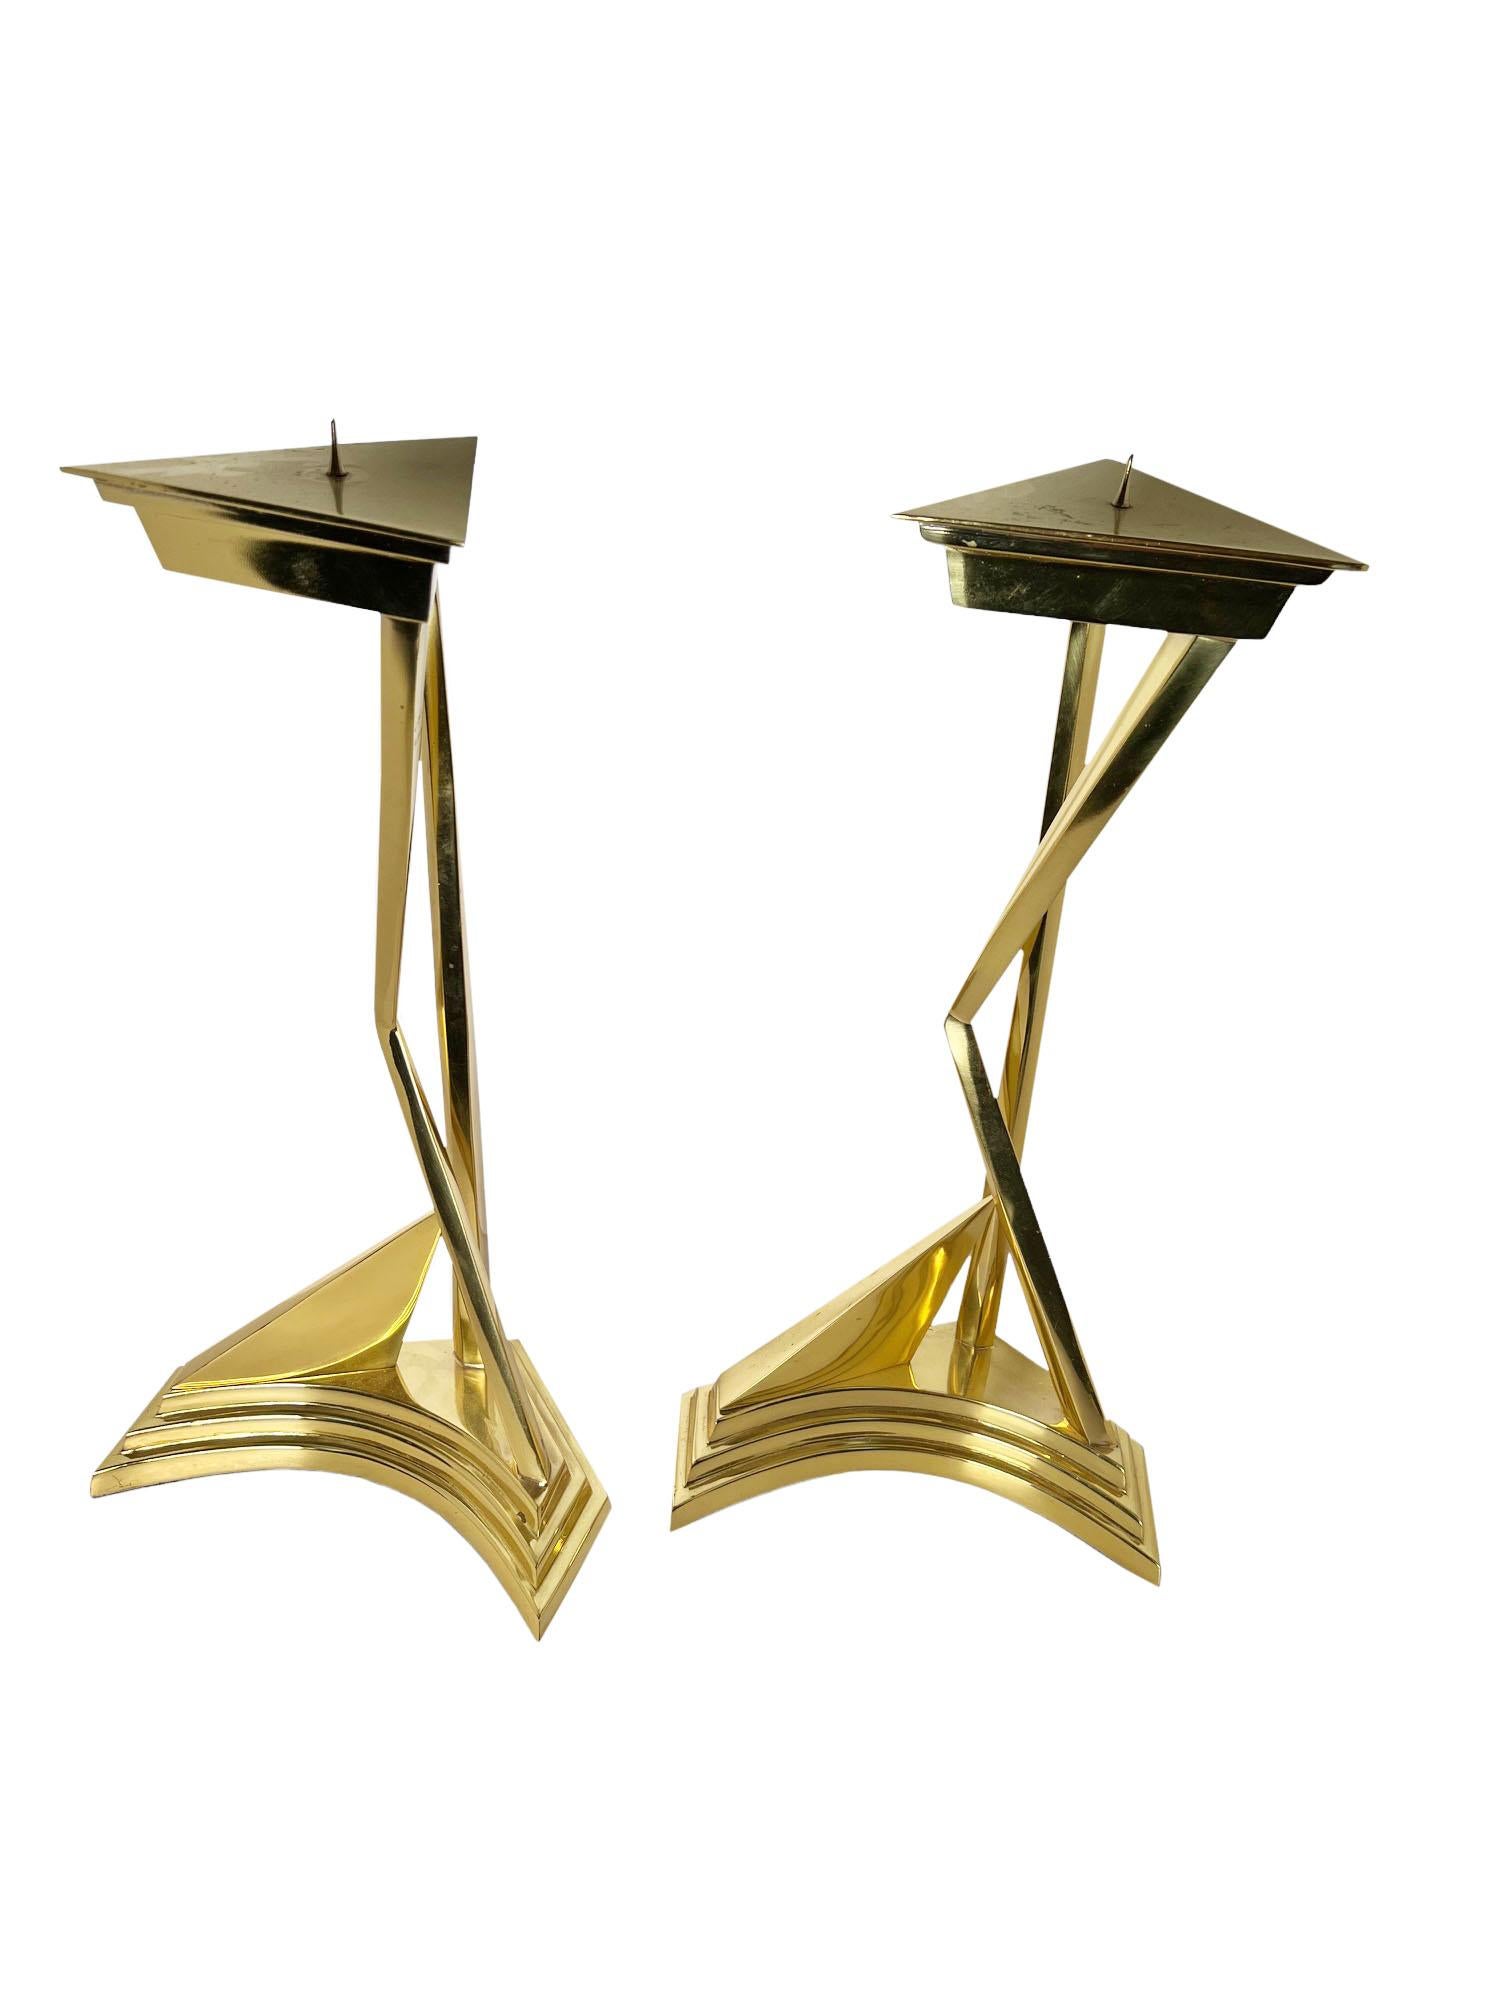 American Salvador Dali Style Mid Century Brass Candlesticks For Sale